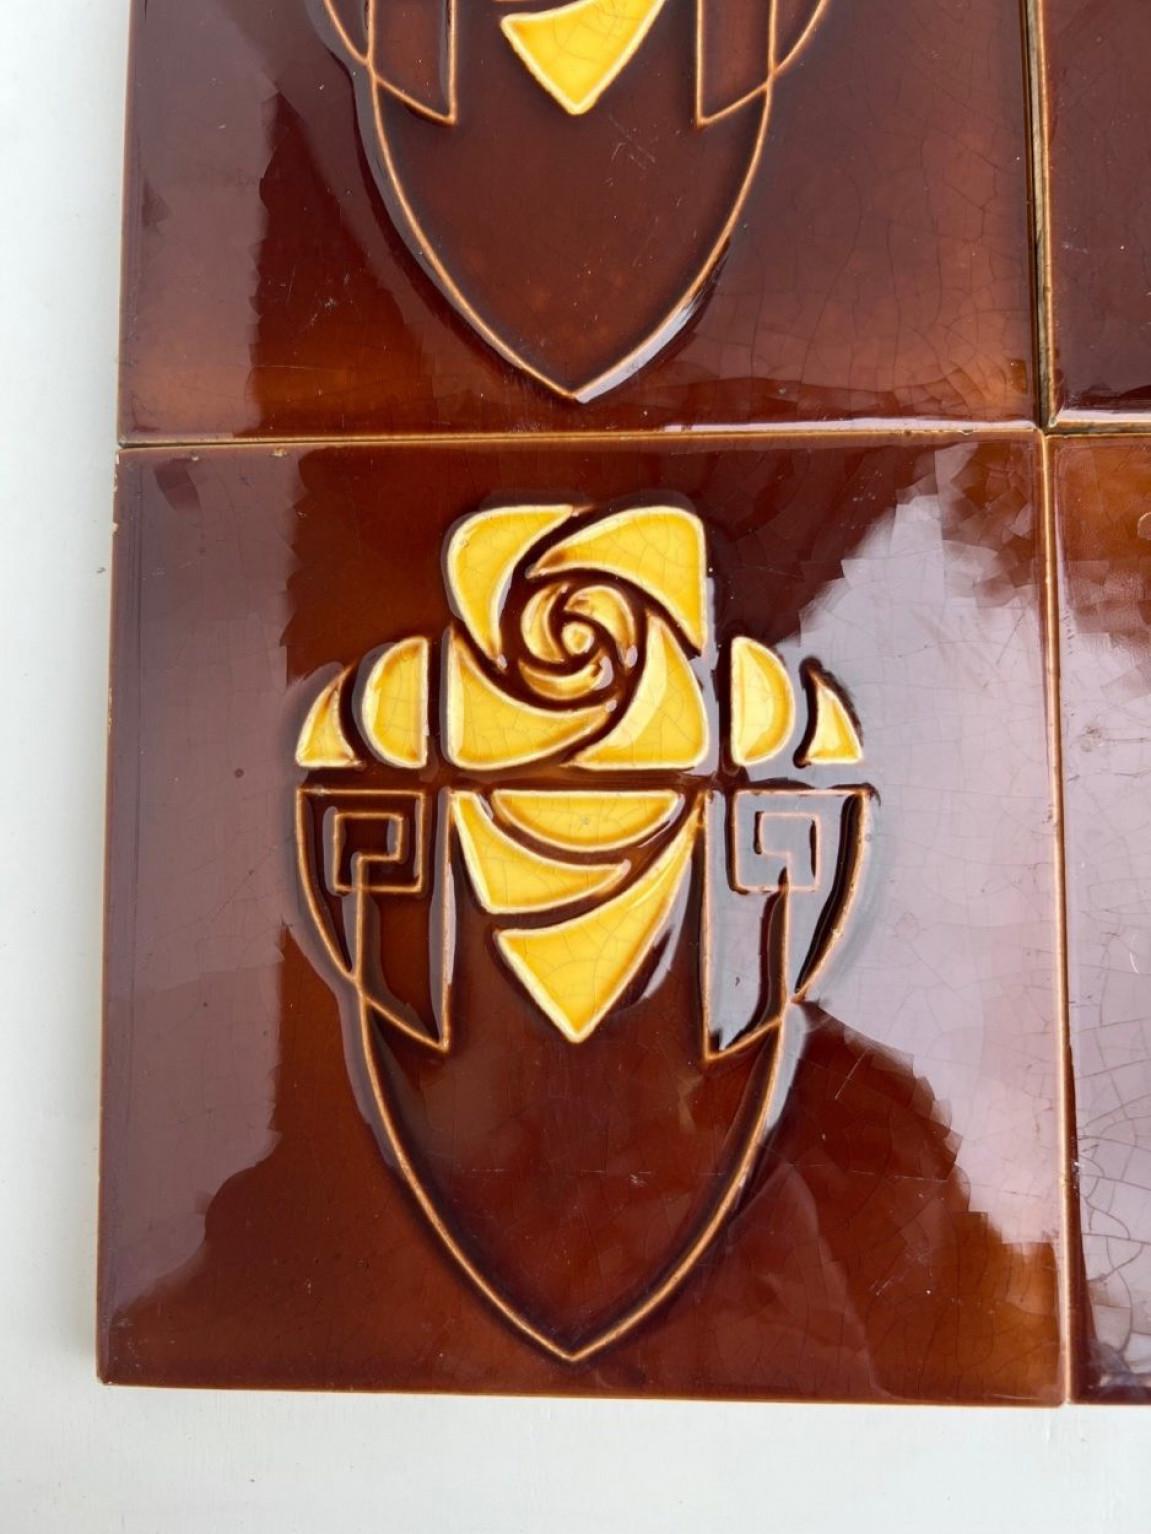 Handmade relief tiles in warm brown and yellow glazed colors. Manufactured around 1920 by Gilliot Hemiksem, Belgium.
These tiles would be charming displayed on easels, framed or incorporated into a custom tile design.

Please note that the price is